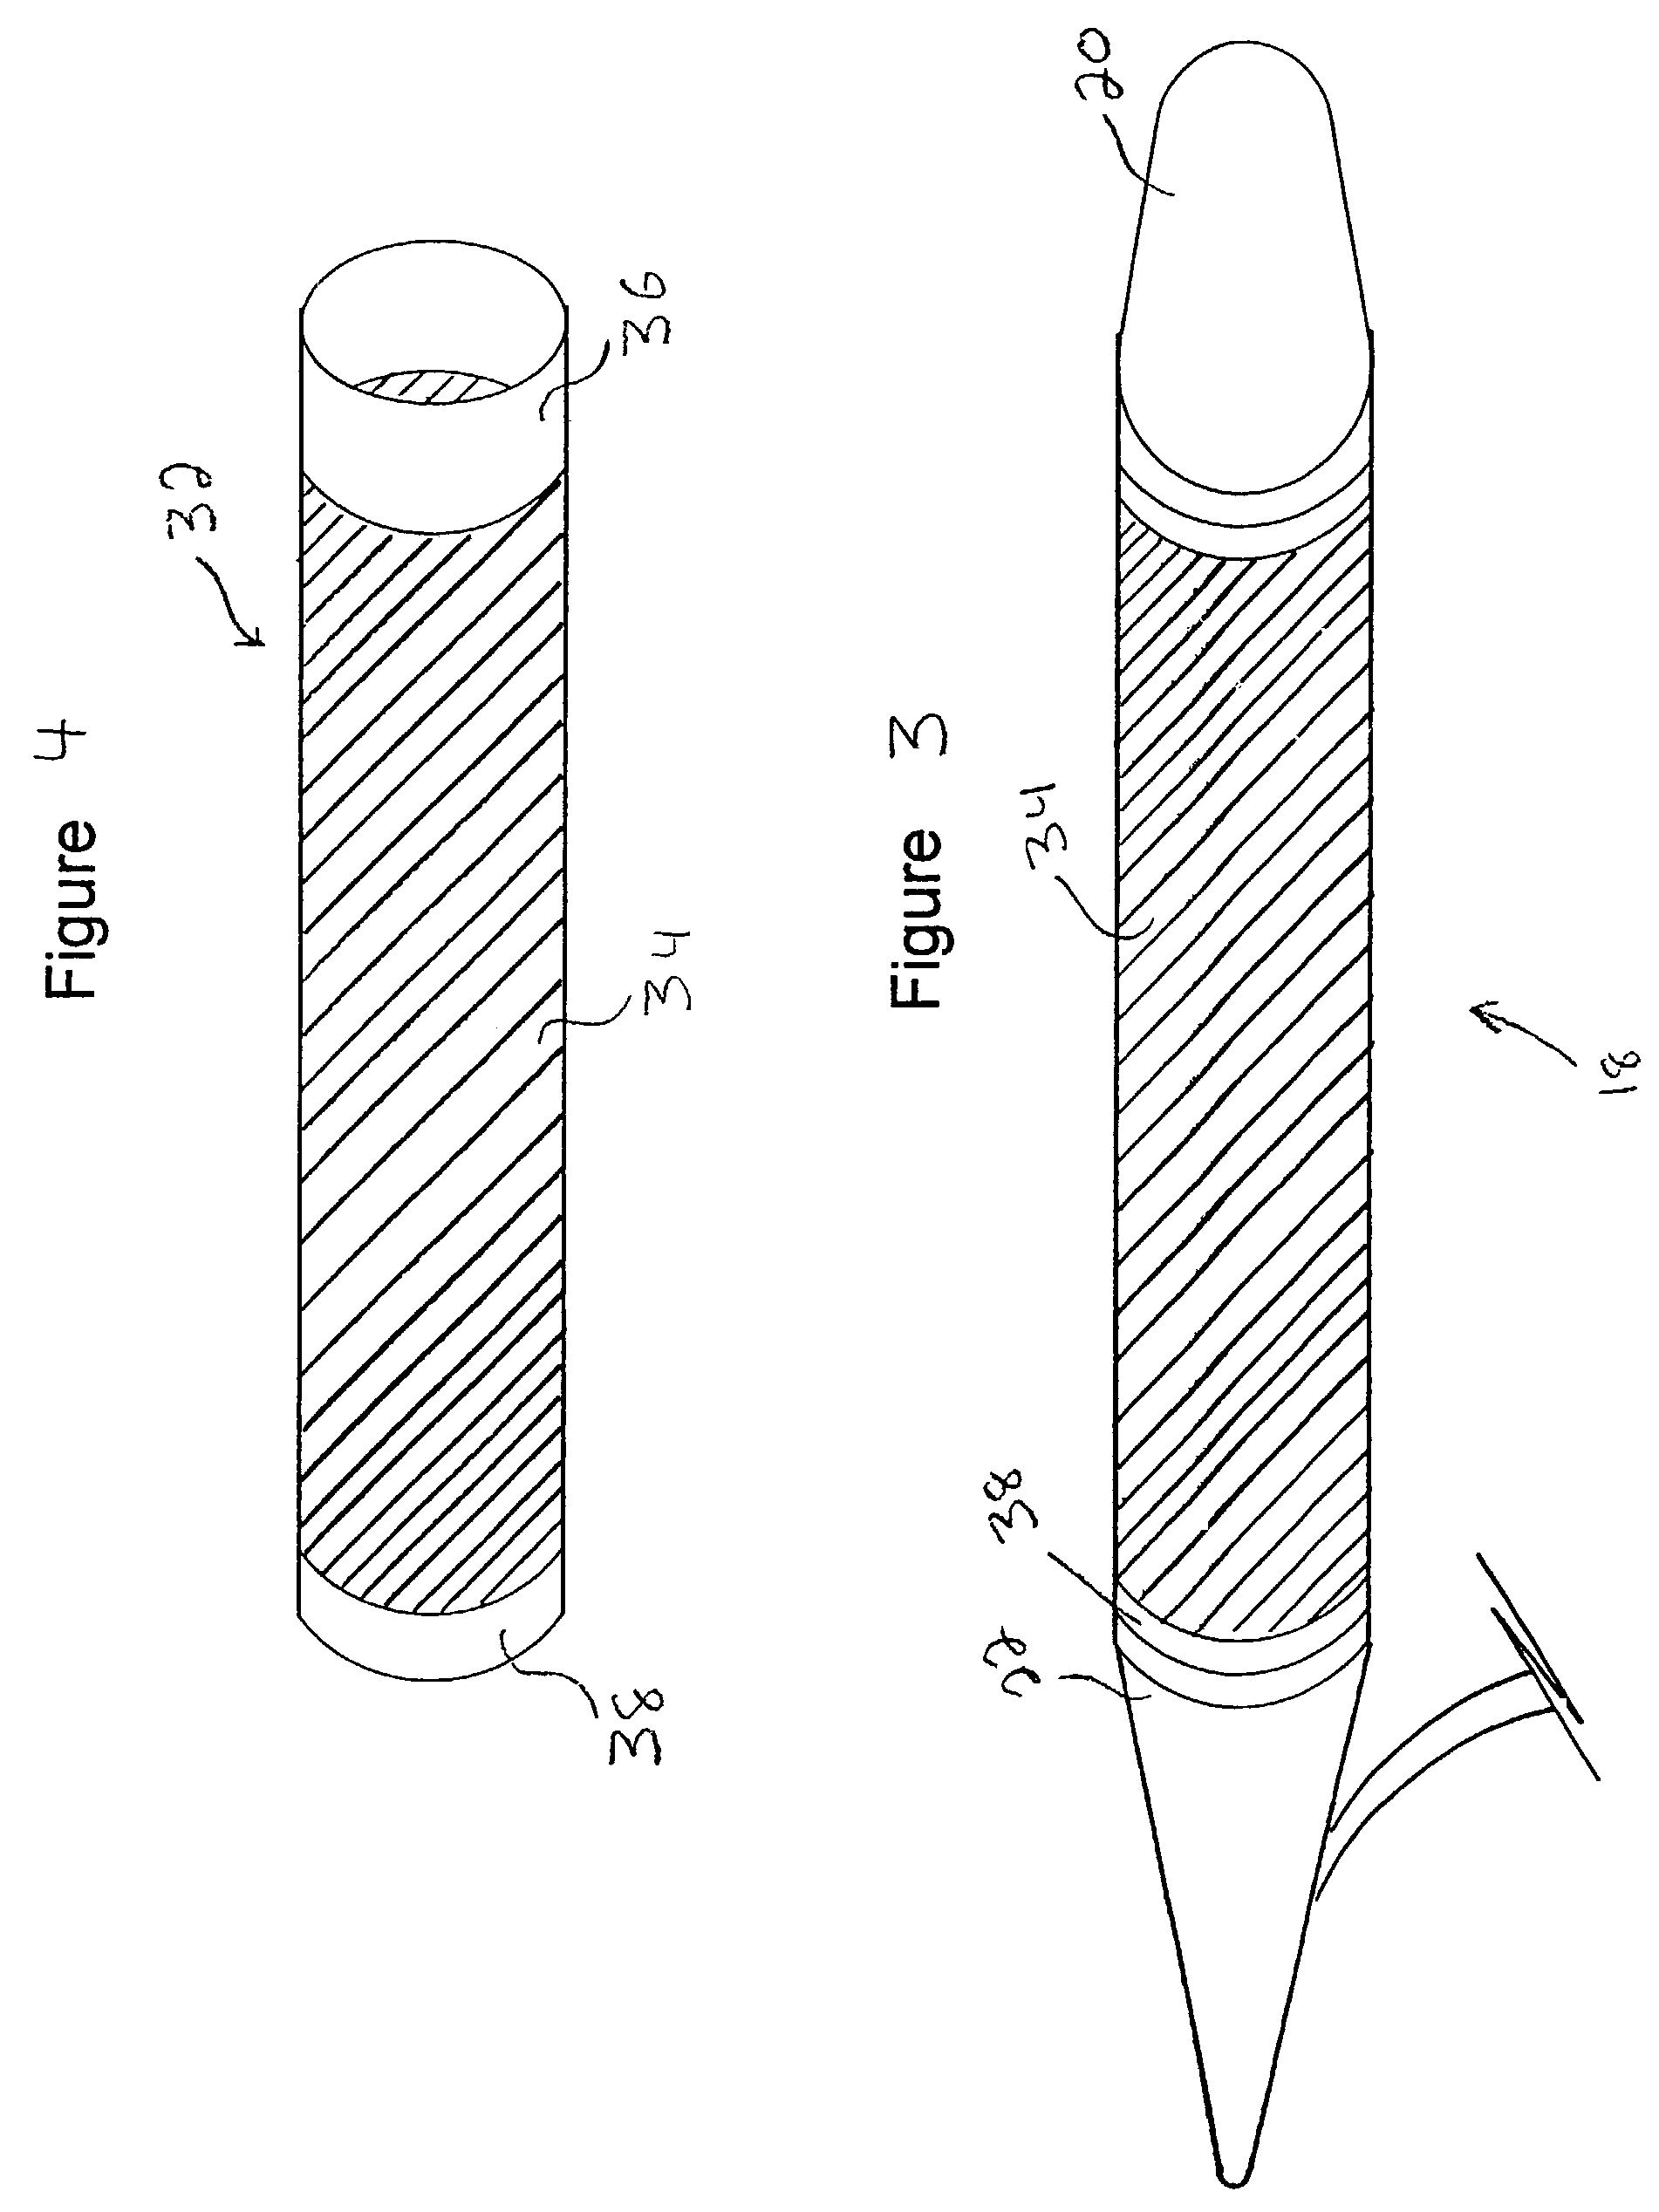 Parylene-coated components for inflatable penile prosthesis